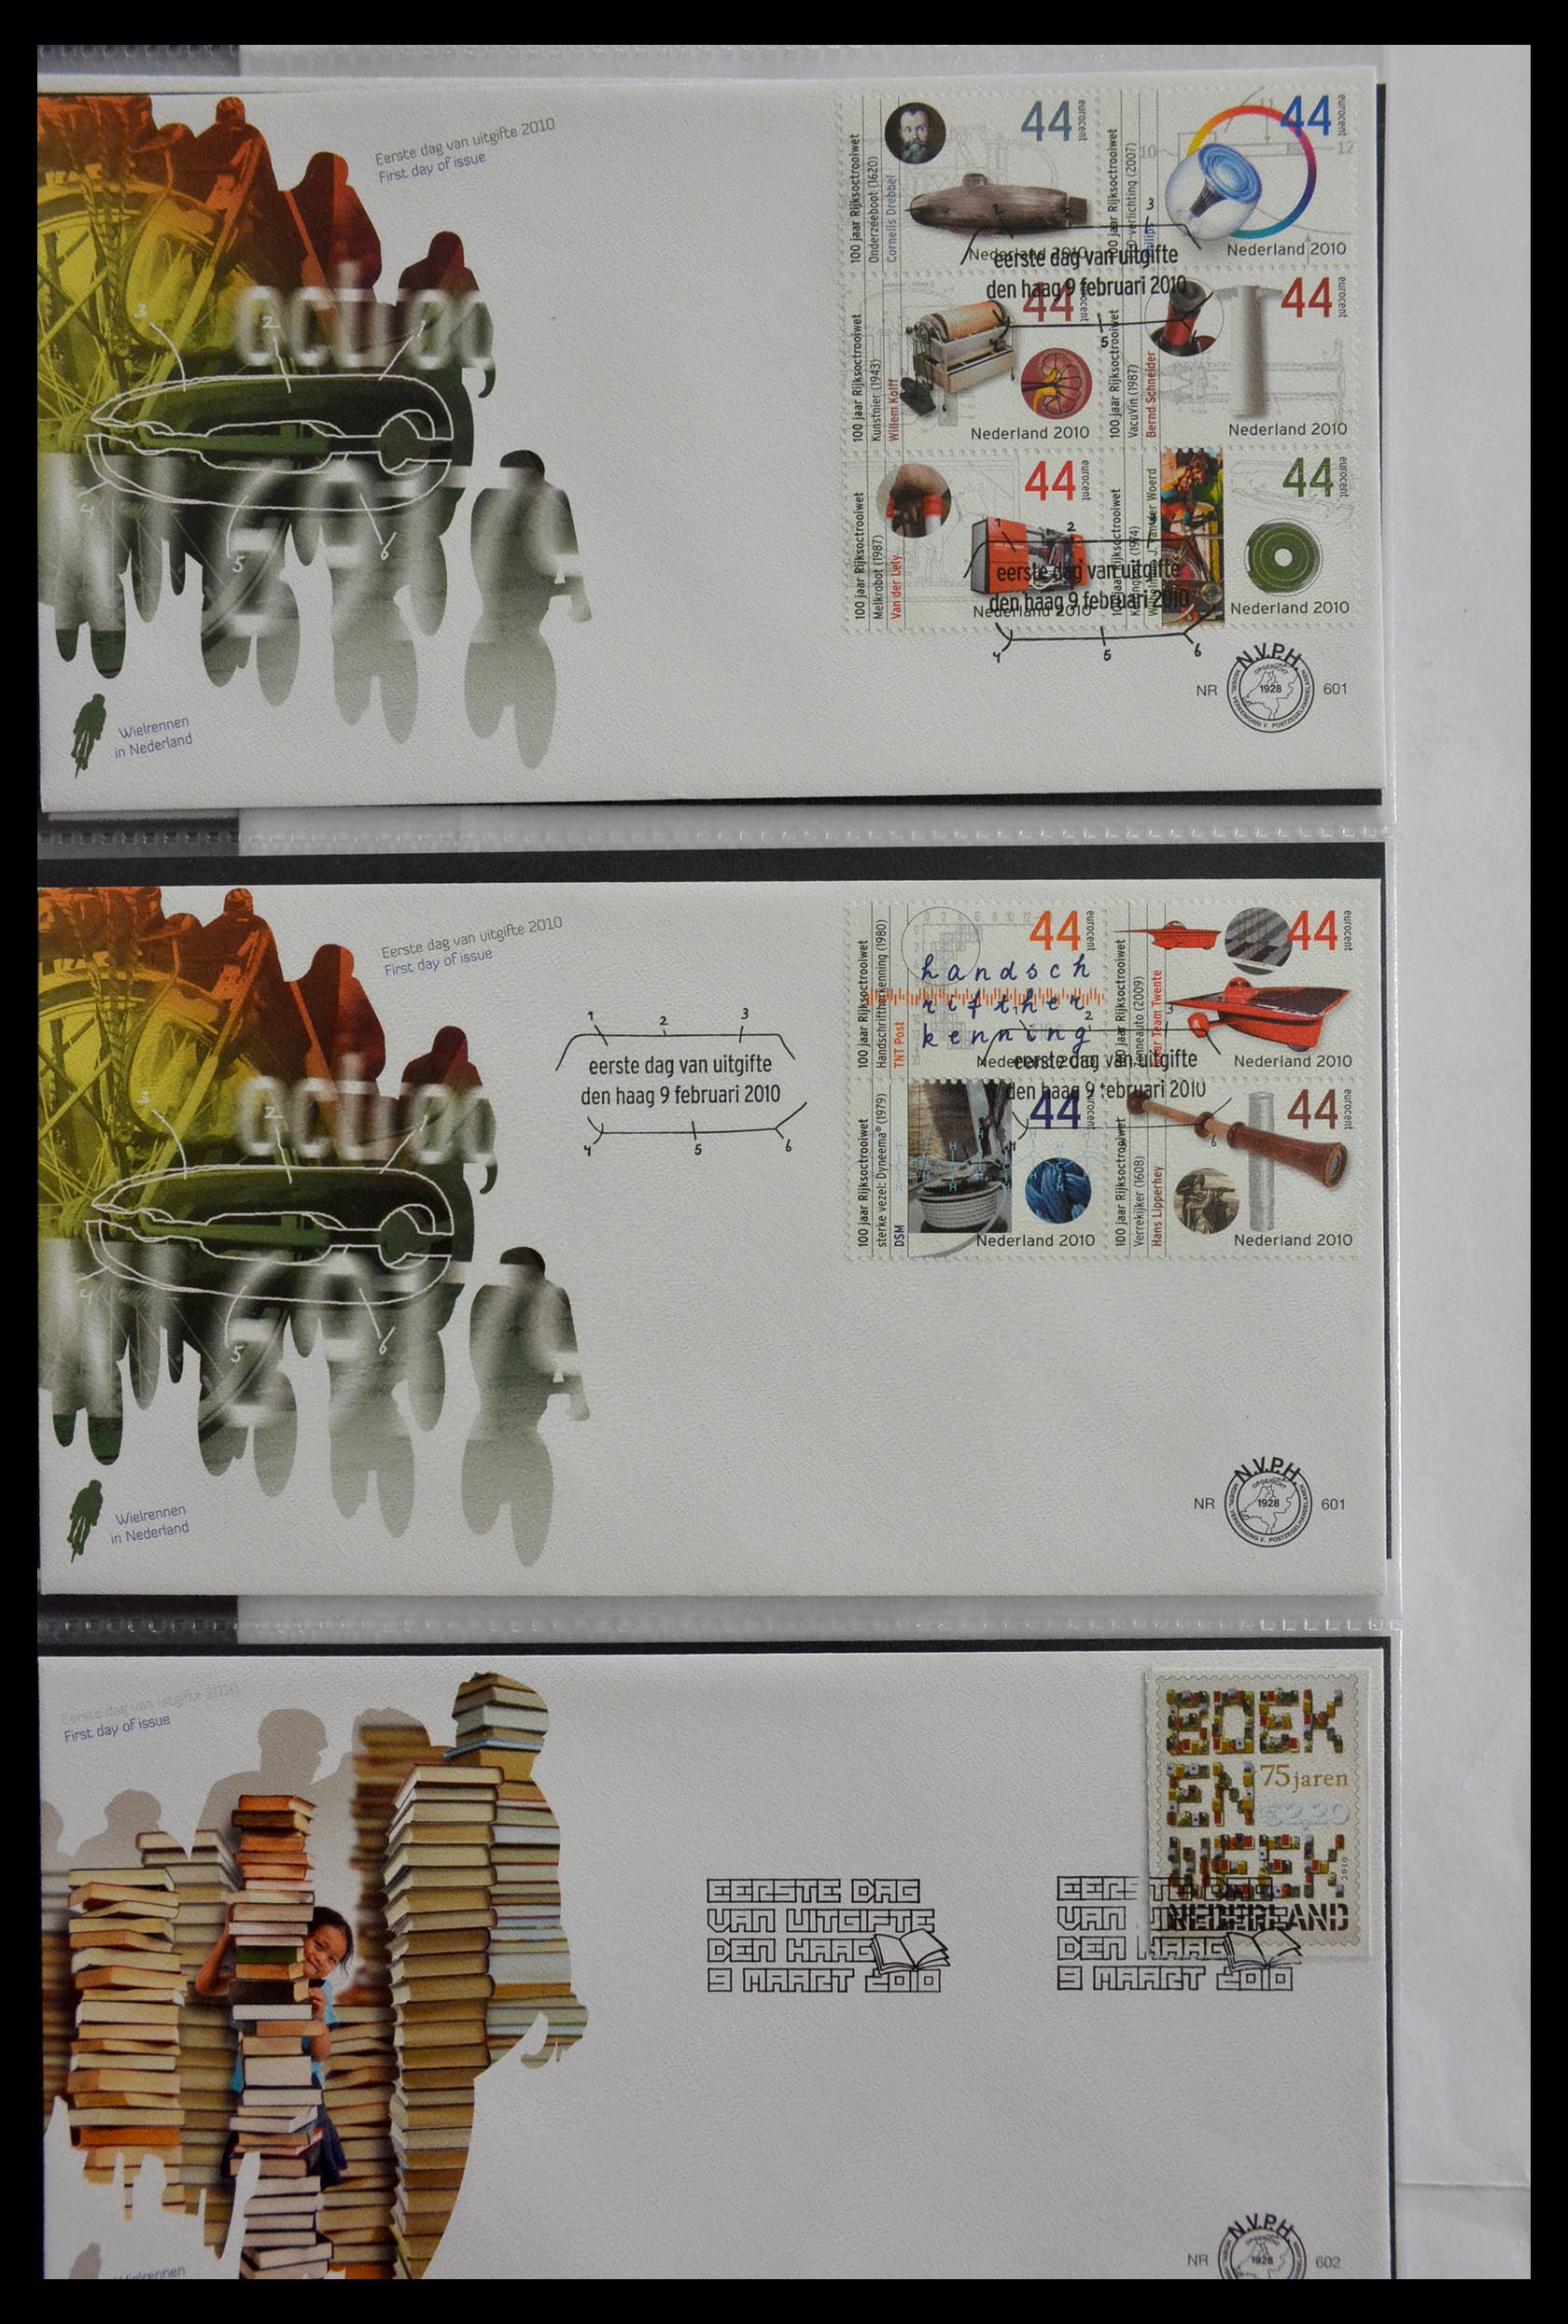 28897 076 - 28897 Netherlands 2001-2013 FDC's.